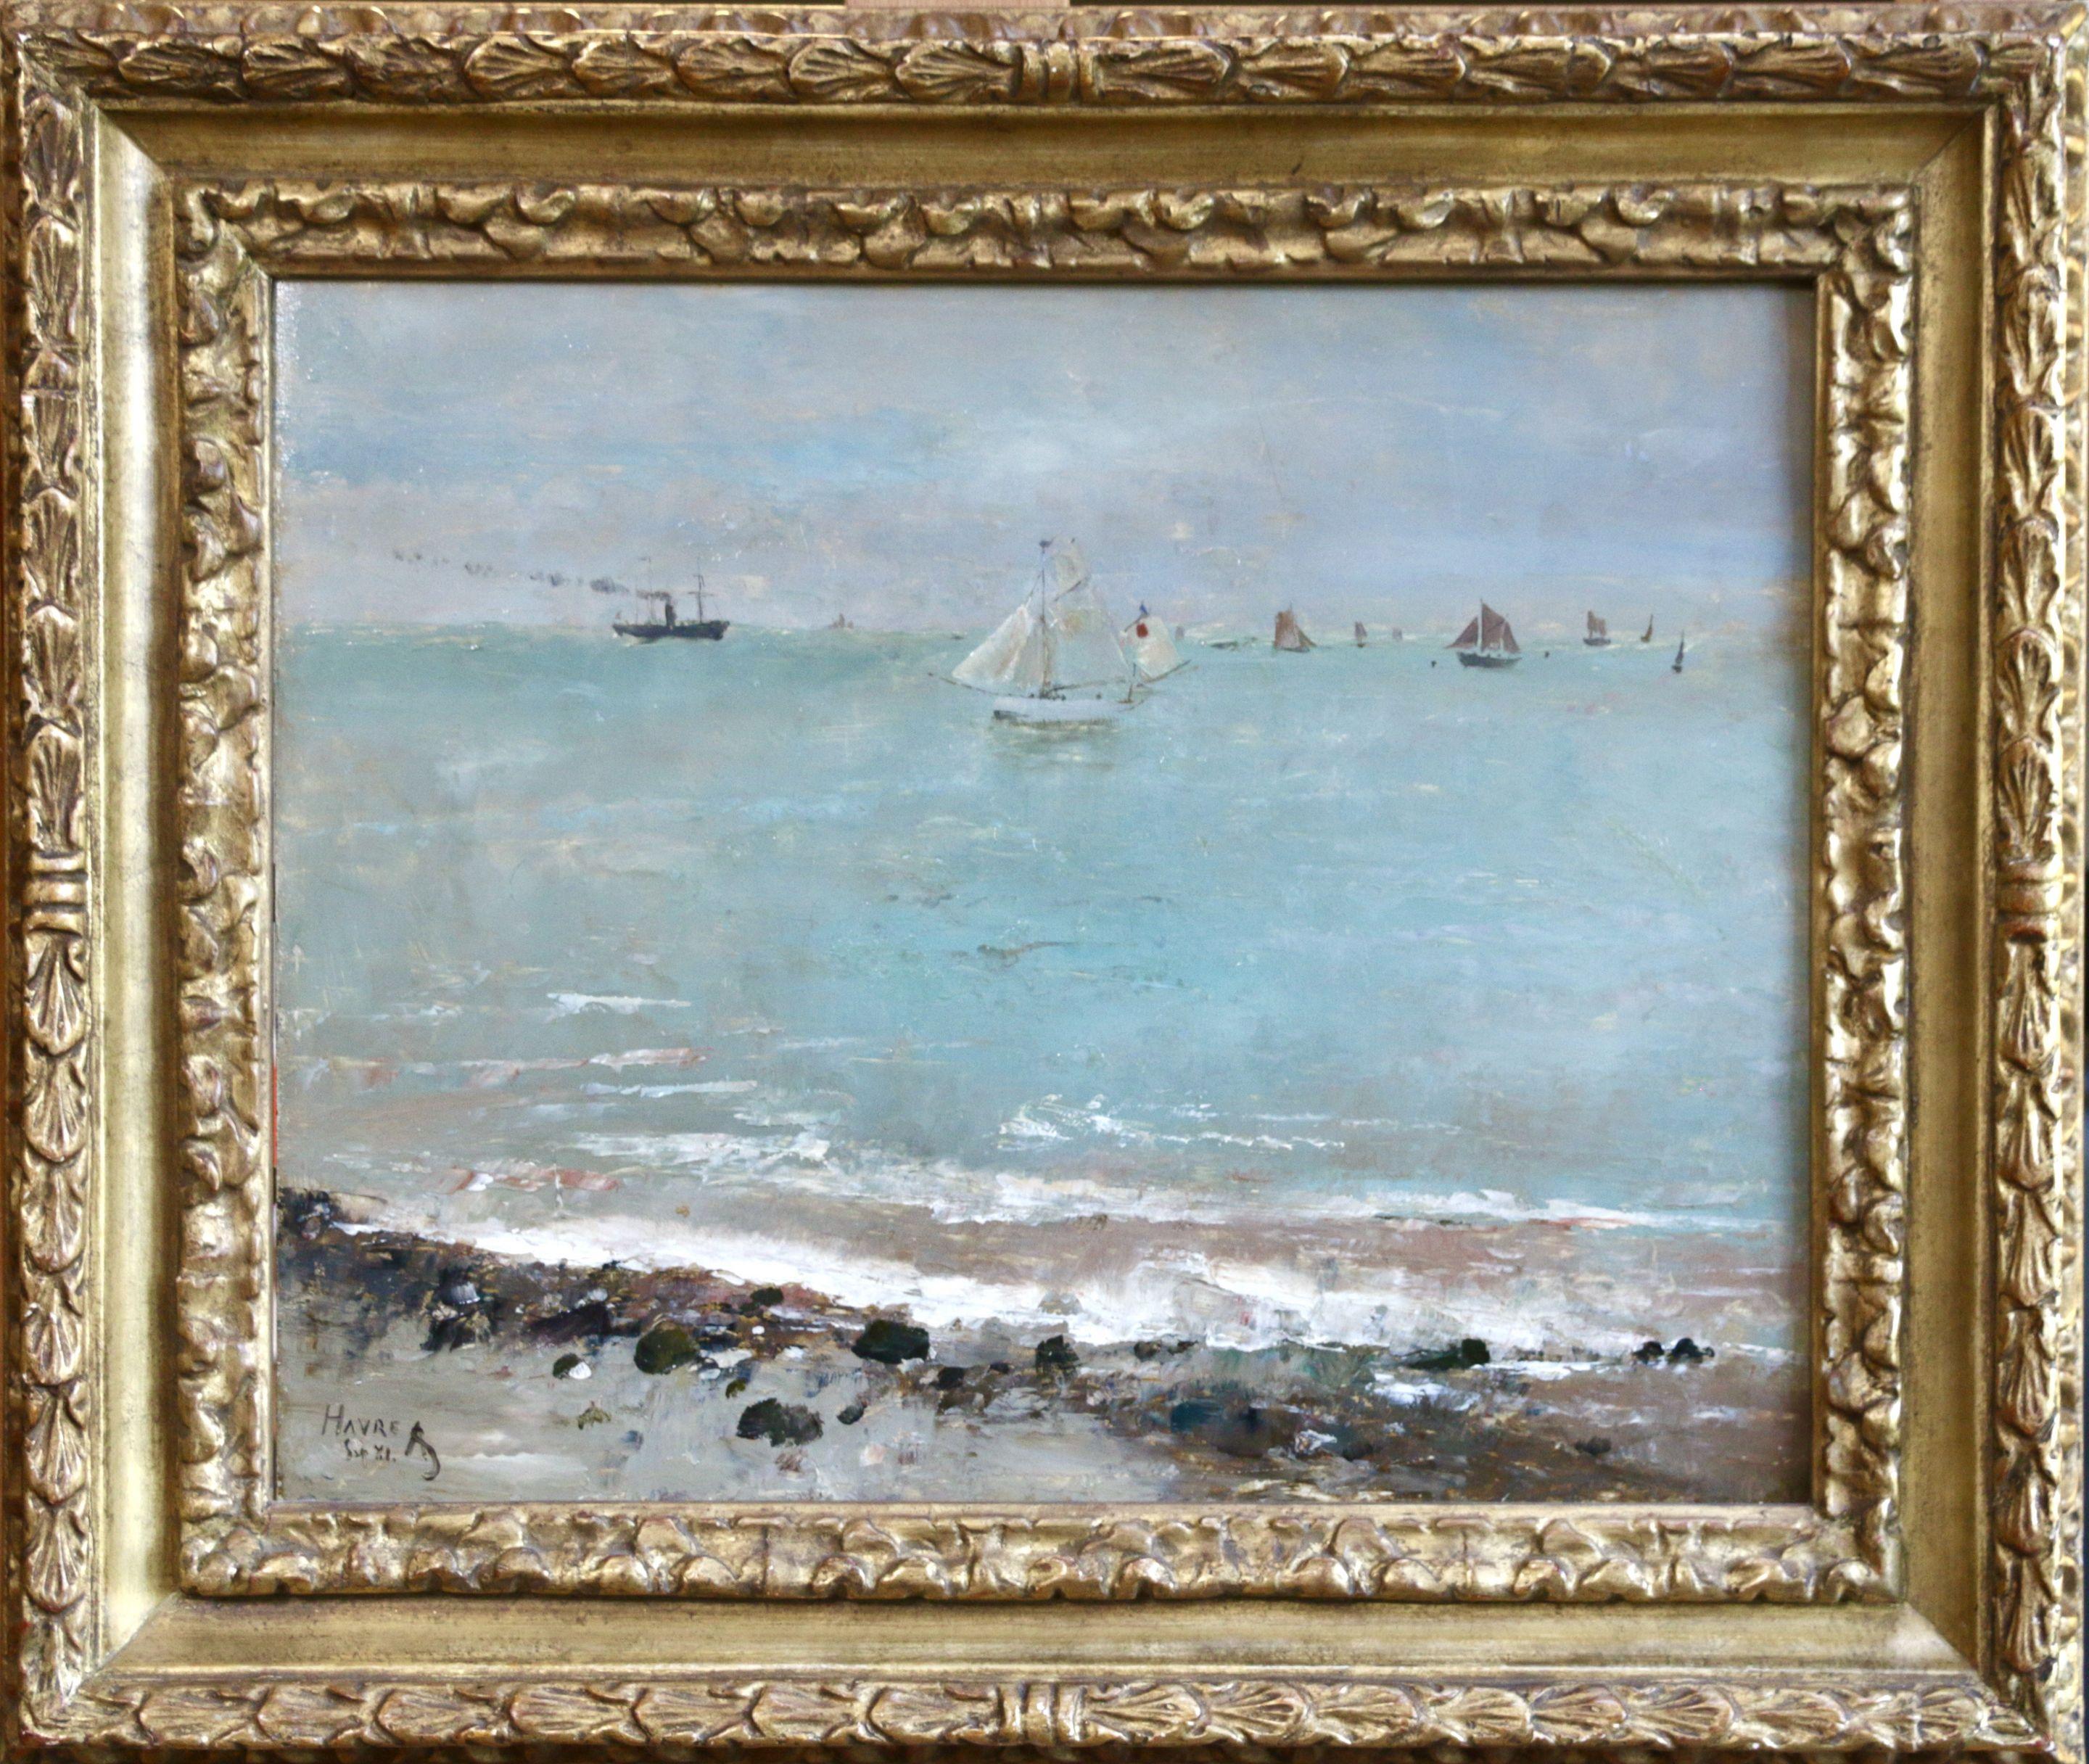 Alfred Émile Léopold Stevens Landscape Painting - Le Havre - 19th Century Belgian Oil, Boats in Seascape by Alfred Stevens